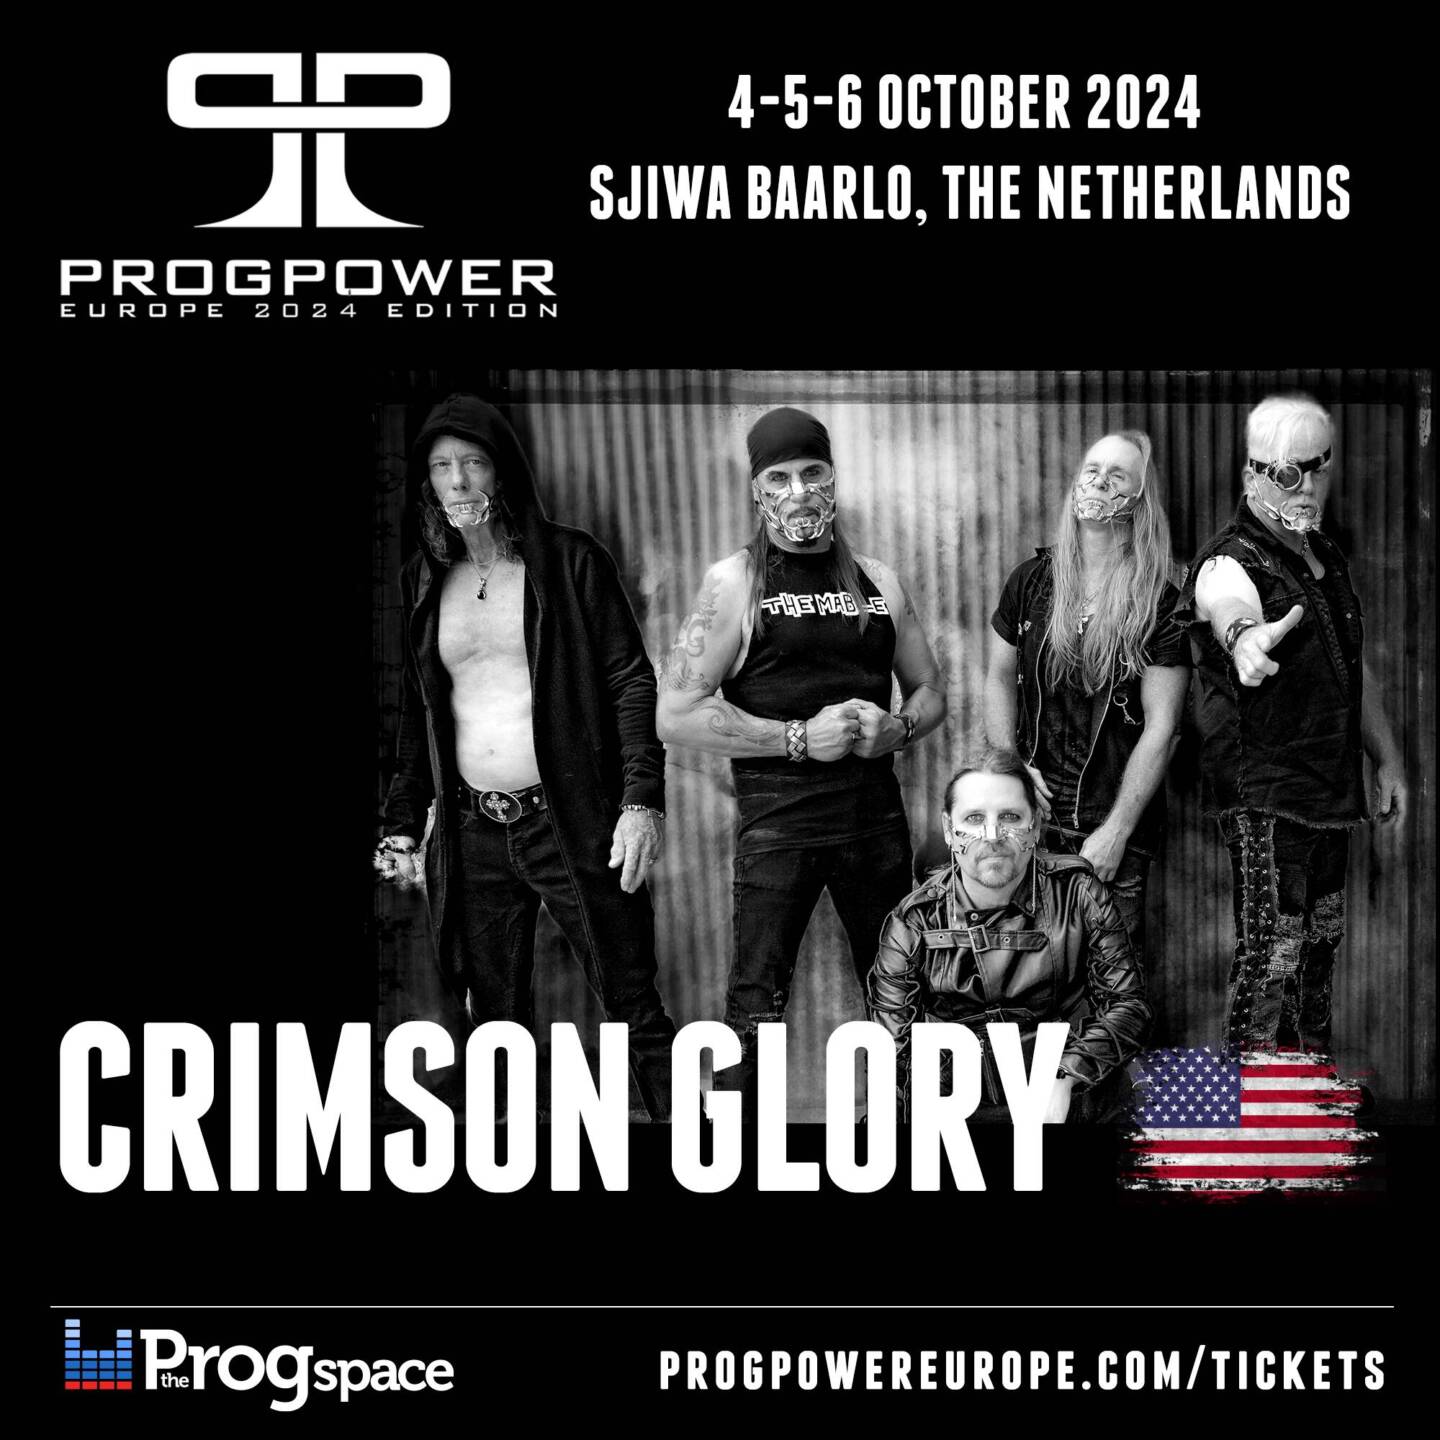 Legendary US band Crimson Glory is the last confirmed band to play at ProgPower Europe 2024!